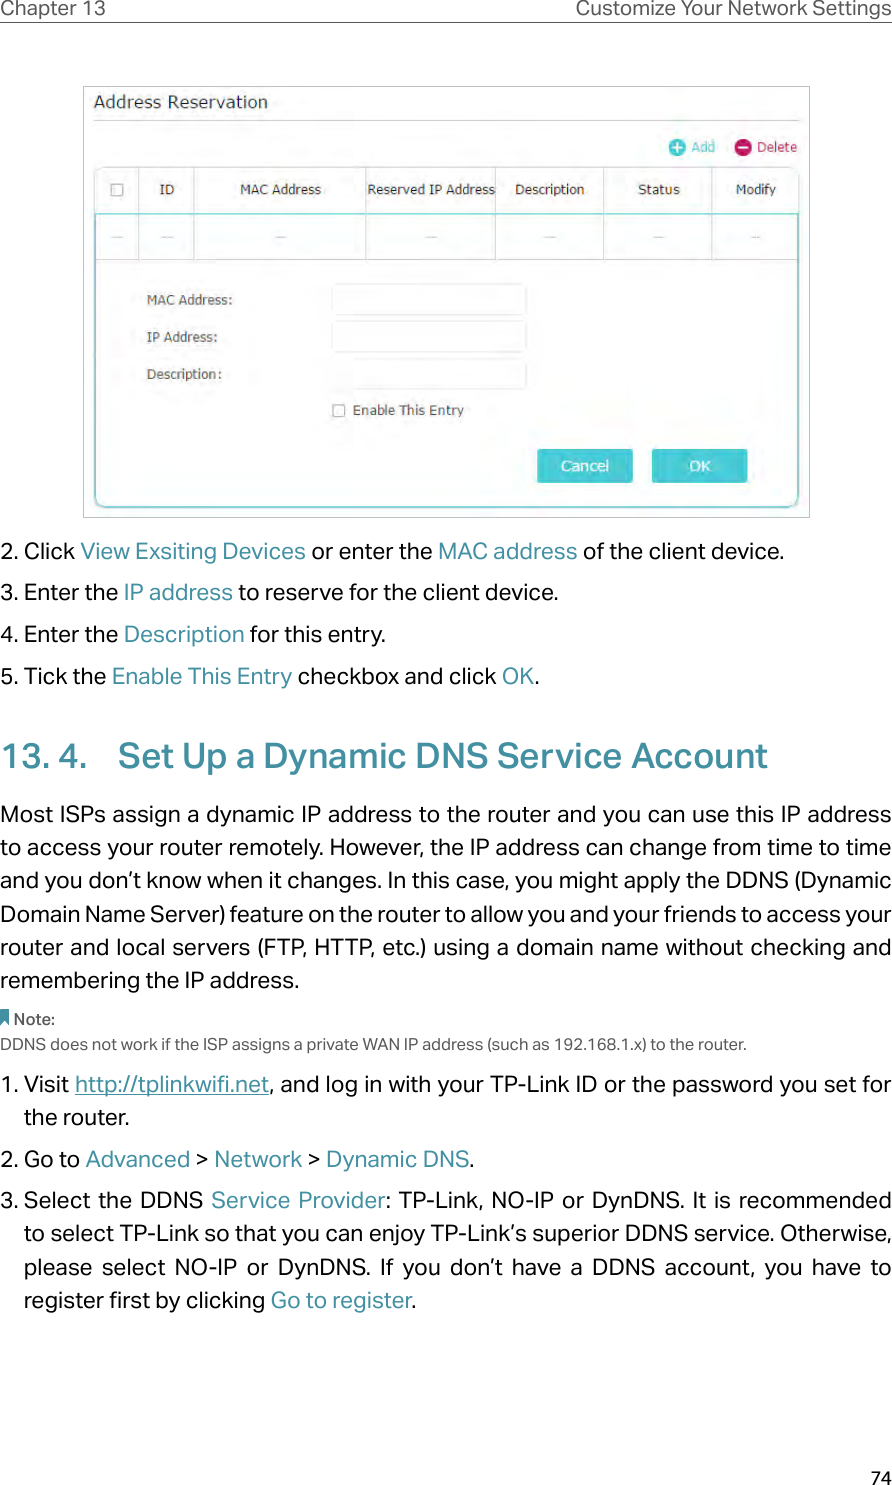 74Chapter 13 Customize Your Network Settings2. Click View Exsiting Devices or enter the MAC address of the client device.3. Enter the IP address to reserve for the client device.4. Enter the Description for this entry.5. Tick the Enable This Entry checkbox and click OK. 13. 4.  Set Up a Dynamic DNS Service AccountMost ISPs assign a dynamic IP address to the router and you can use this IP address to access your router remotely. However, the IP address can change from time to time and you don’t know when it changes. In this case, you might apply the DDNS (Dynamic Domain Name Server) feature on the router to allow you and your friends to access your router and local servers (FTP, HTTP, etc.) using a domain name without checking and remembering the IP address. Note: DDNS does not work if the ISP assigns a private WAN IP address (such as 192.168.1.x) to the router. 1. Visit http://tplinkwifi.net, and log in with your TP-Link ID or the password you set for the router.2. Go to Advanced &gt; Network &gt; Dynamic DNS.3. Select the DDNS Service Provider: TP-Link, NO-IP or DynDNS. It is recommended to select TP-Link so that you can enjoy TP-Link’s superior DDNS service. Otherwise, please select NO-IP or DynDNS. If you don’t have a DDNS account, you have to  register first by clicking Go to register.